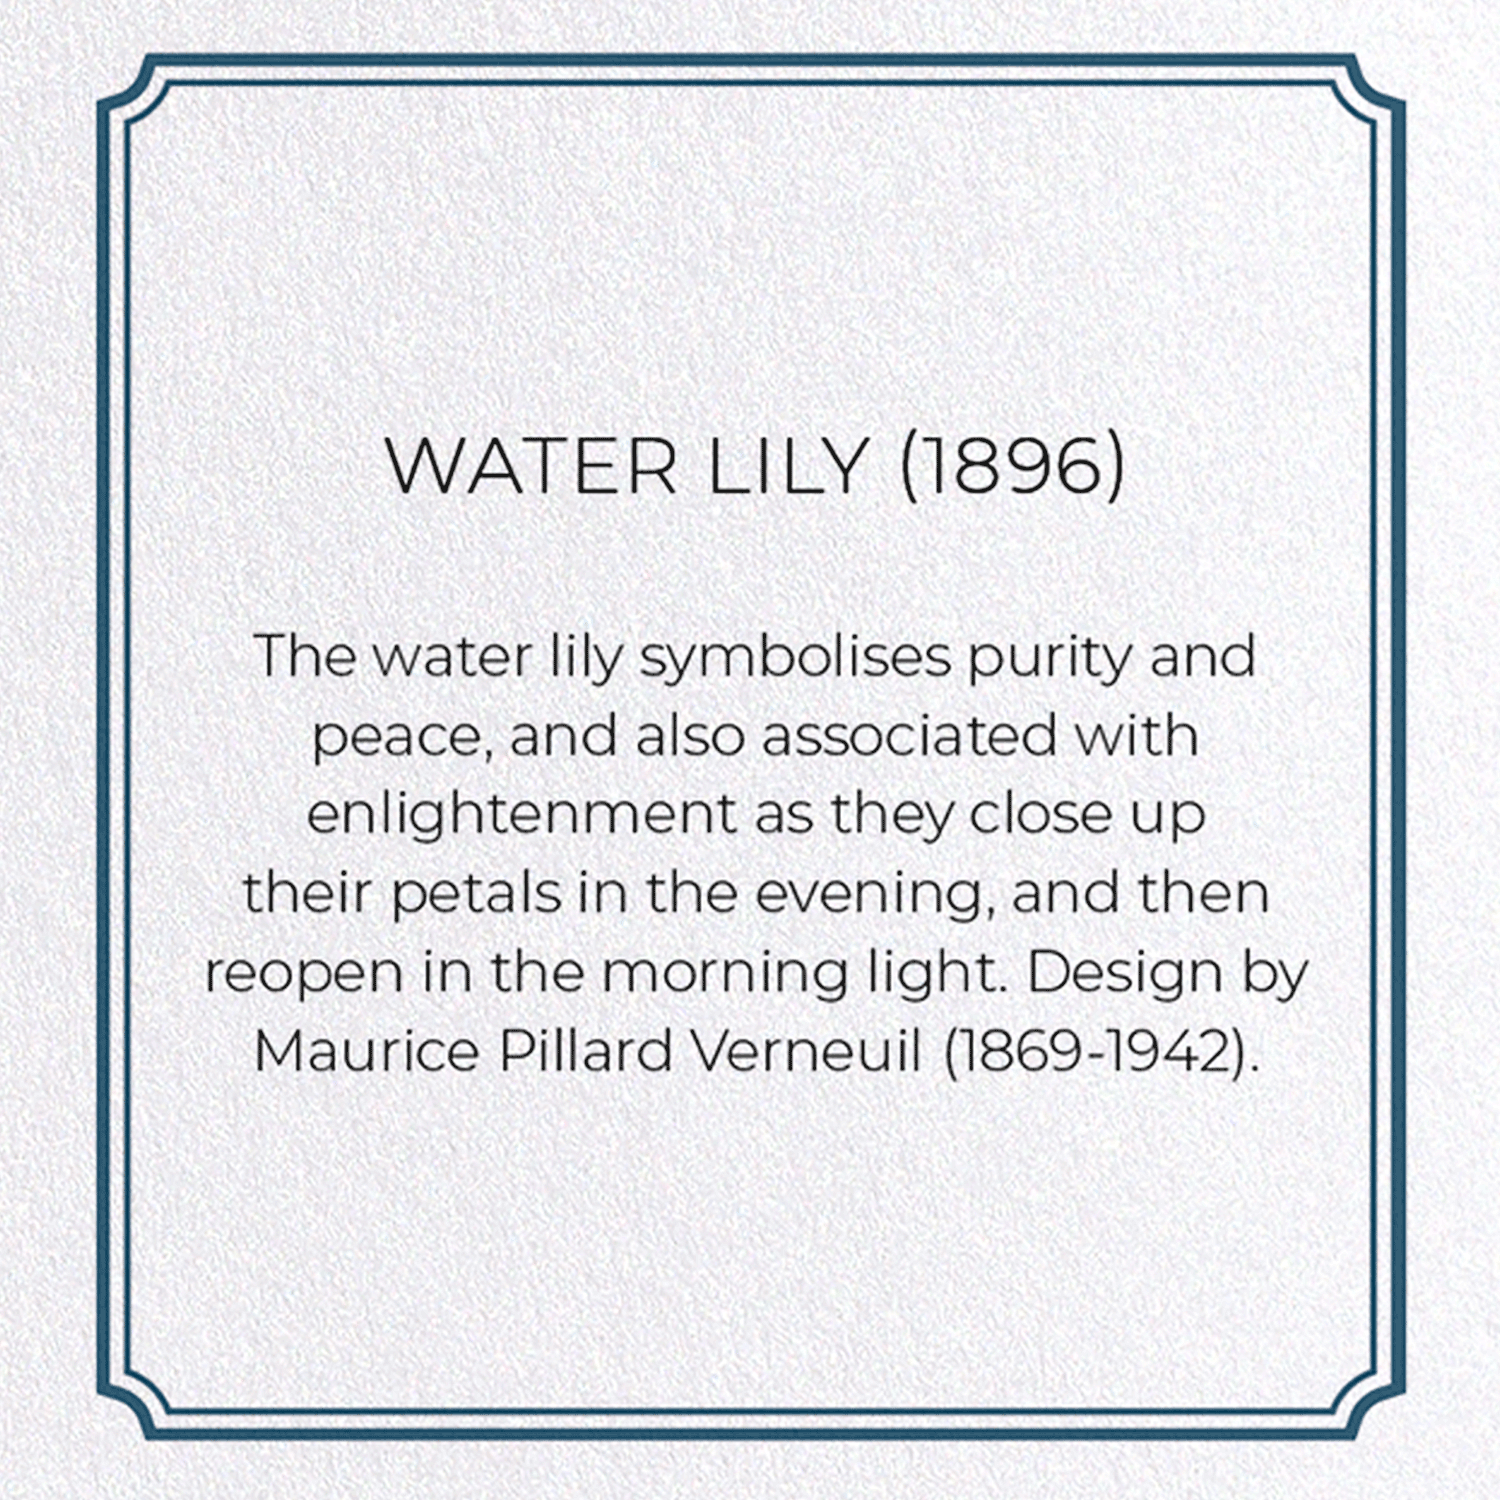 WATER LILY (1896)